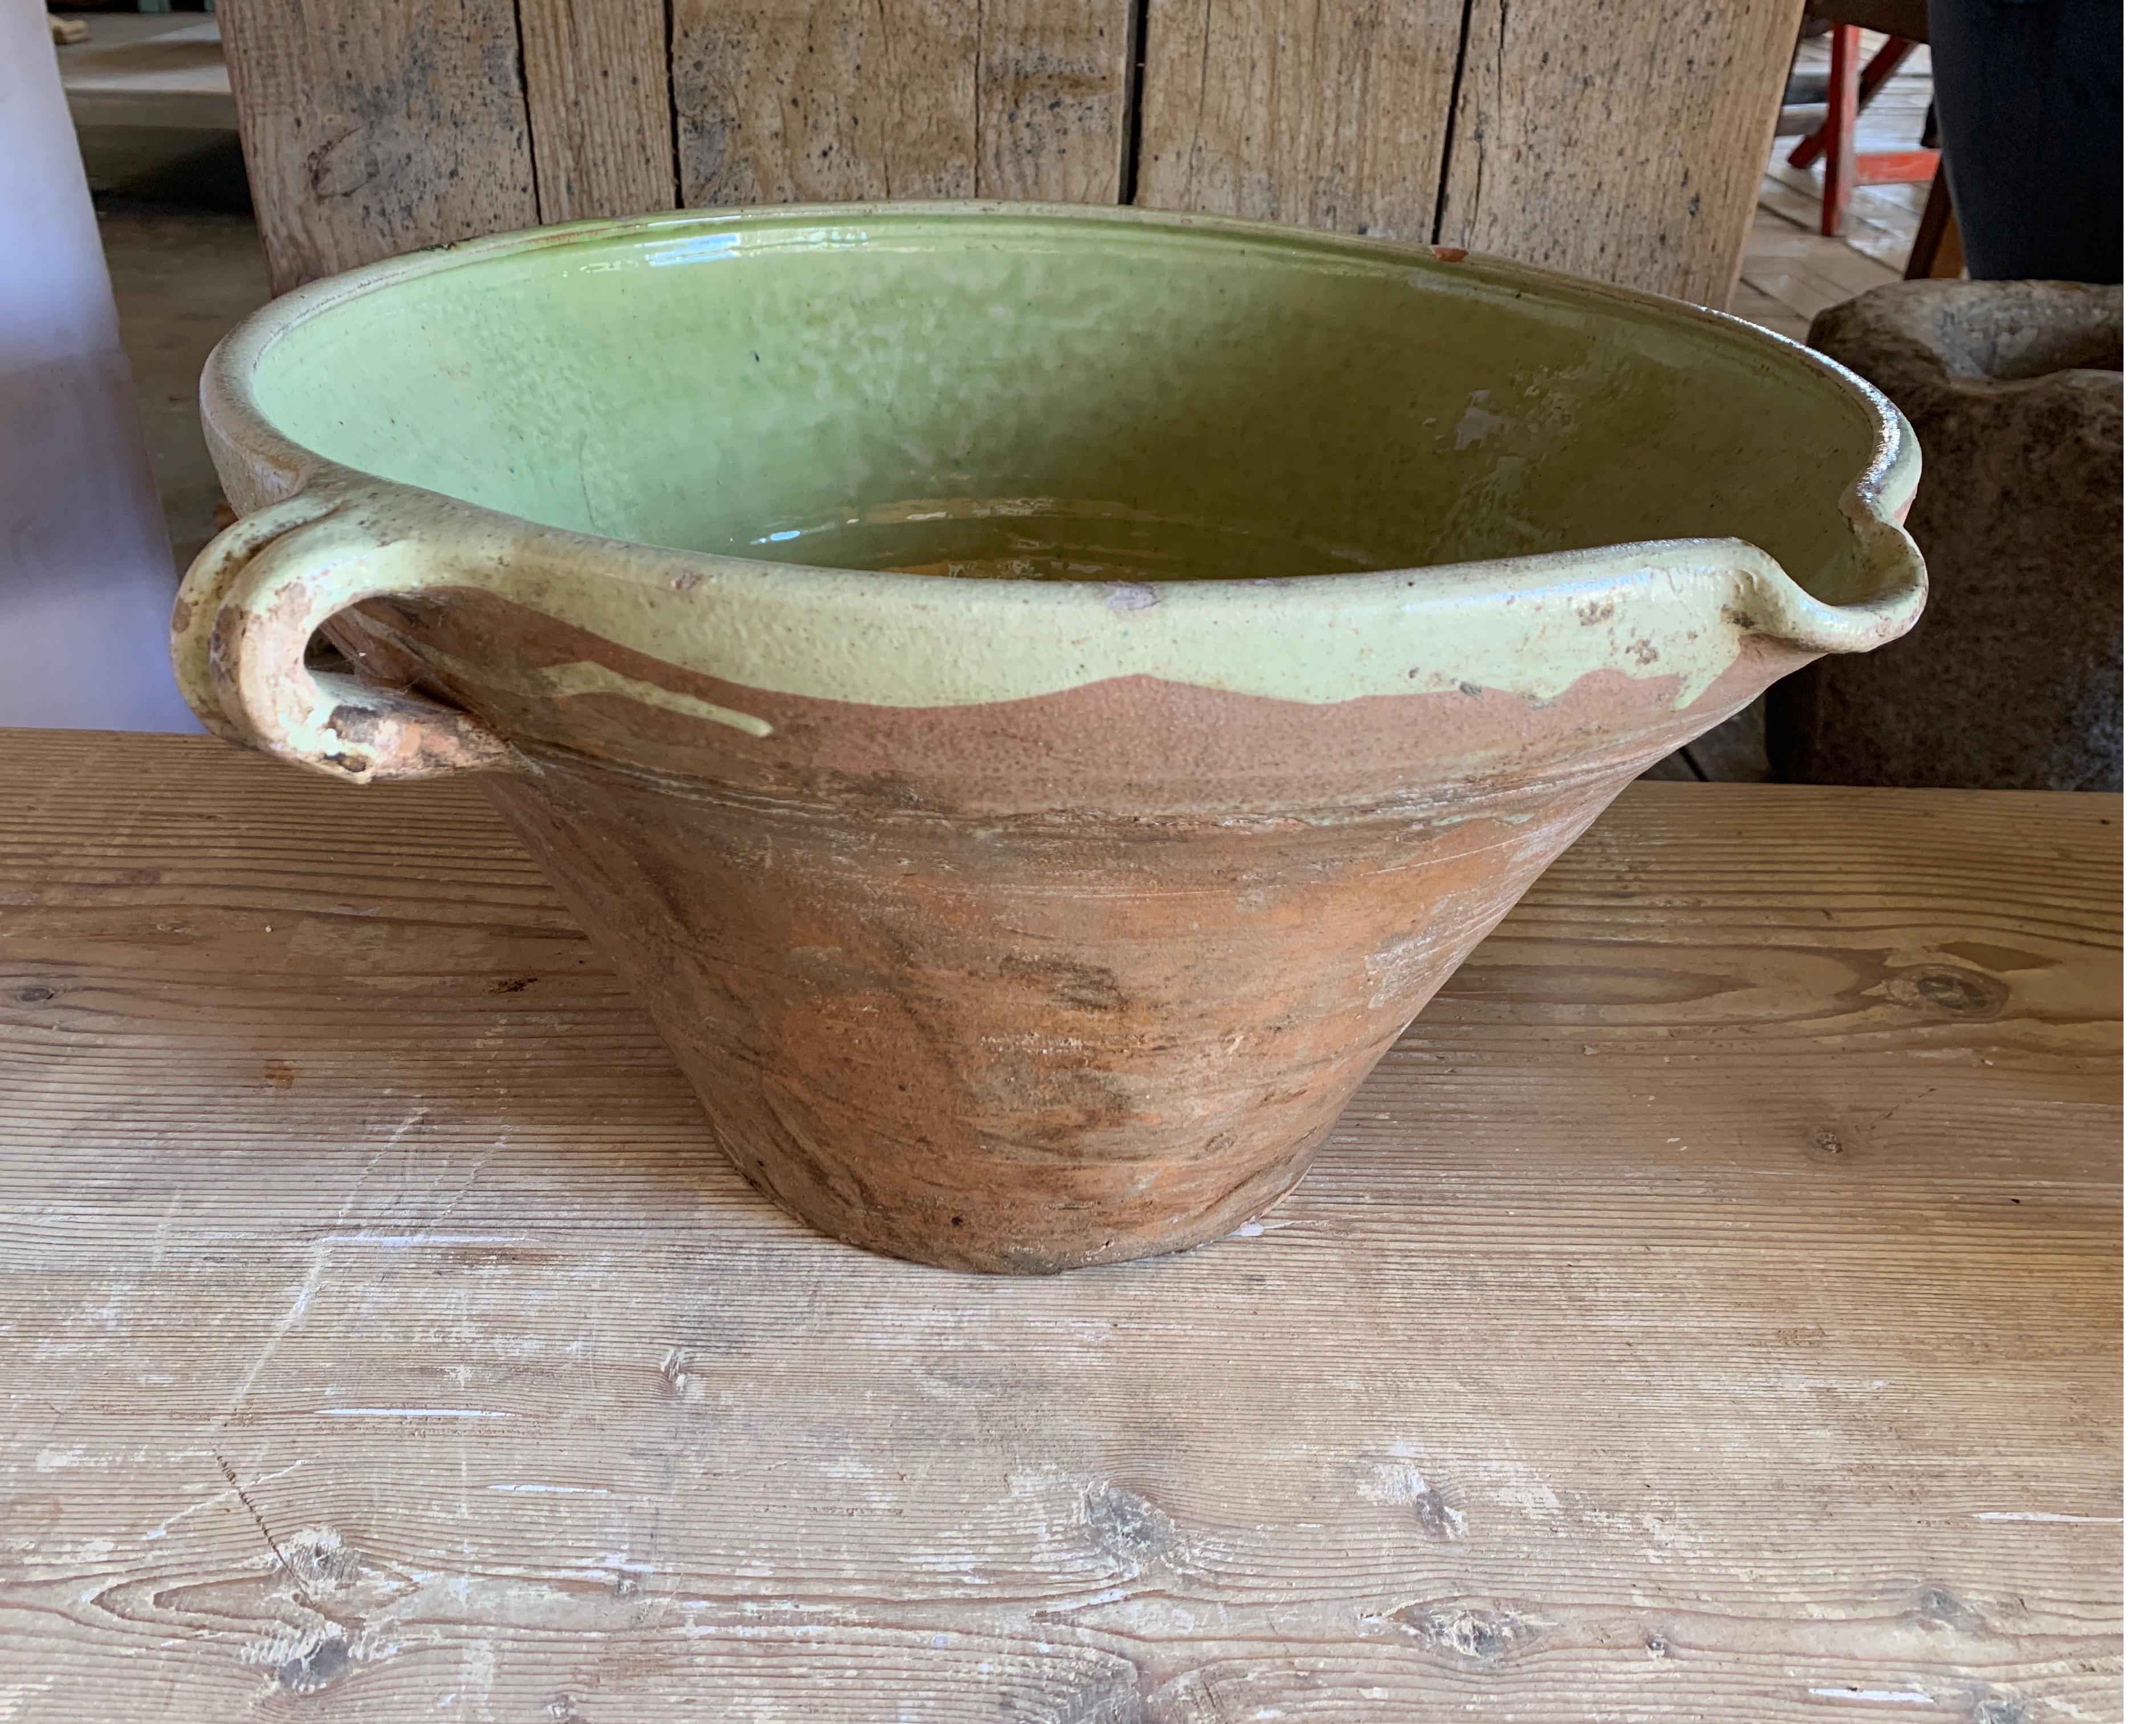 I have never seen this beautiful lime green interior on the French pots before. It really pretty a great size: 1 19 W x 17 D x 9 T.